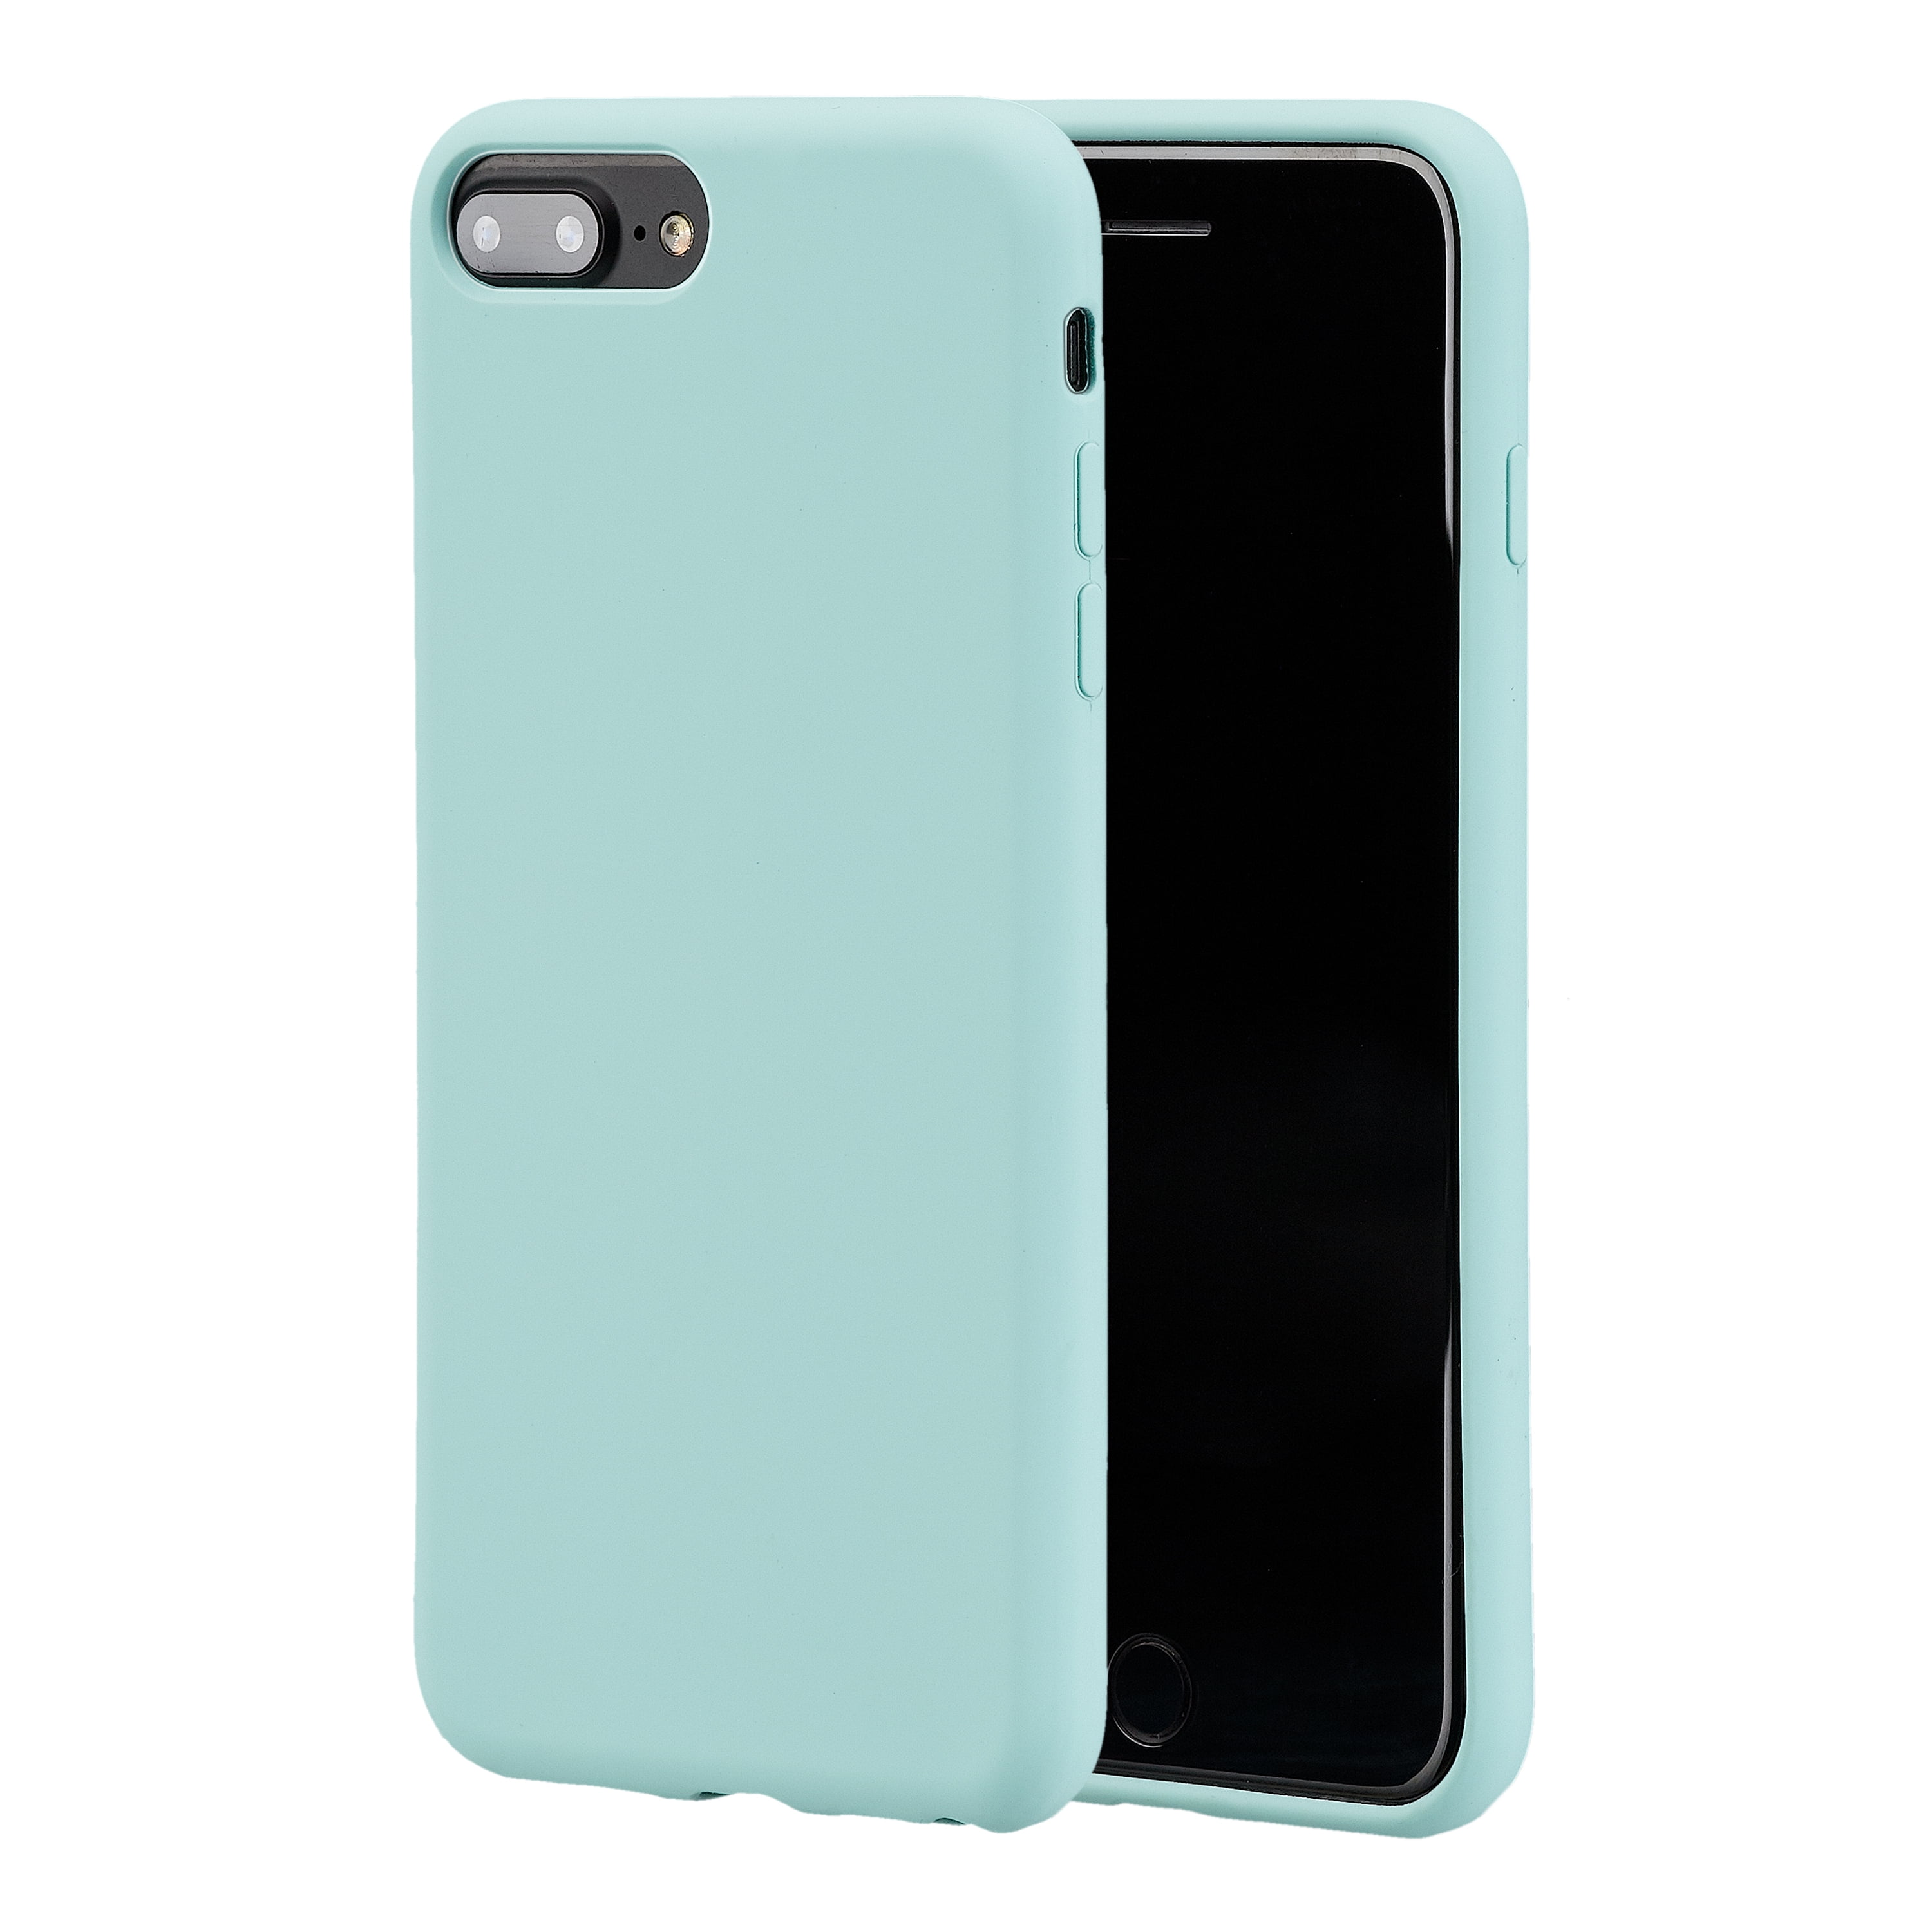 Blackweb iPhone 6, 7 & 8 Plus Soft Touch Silicone Case Assorted